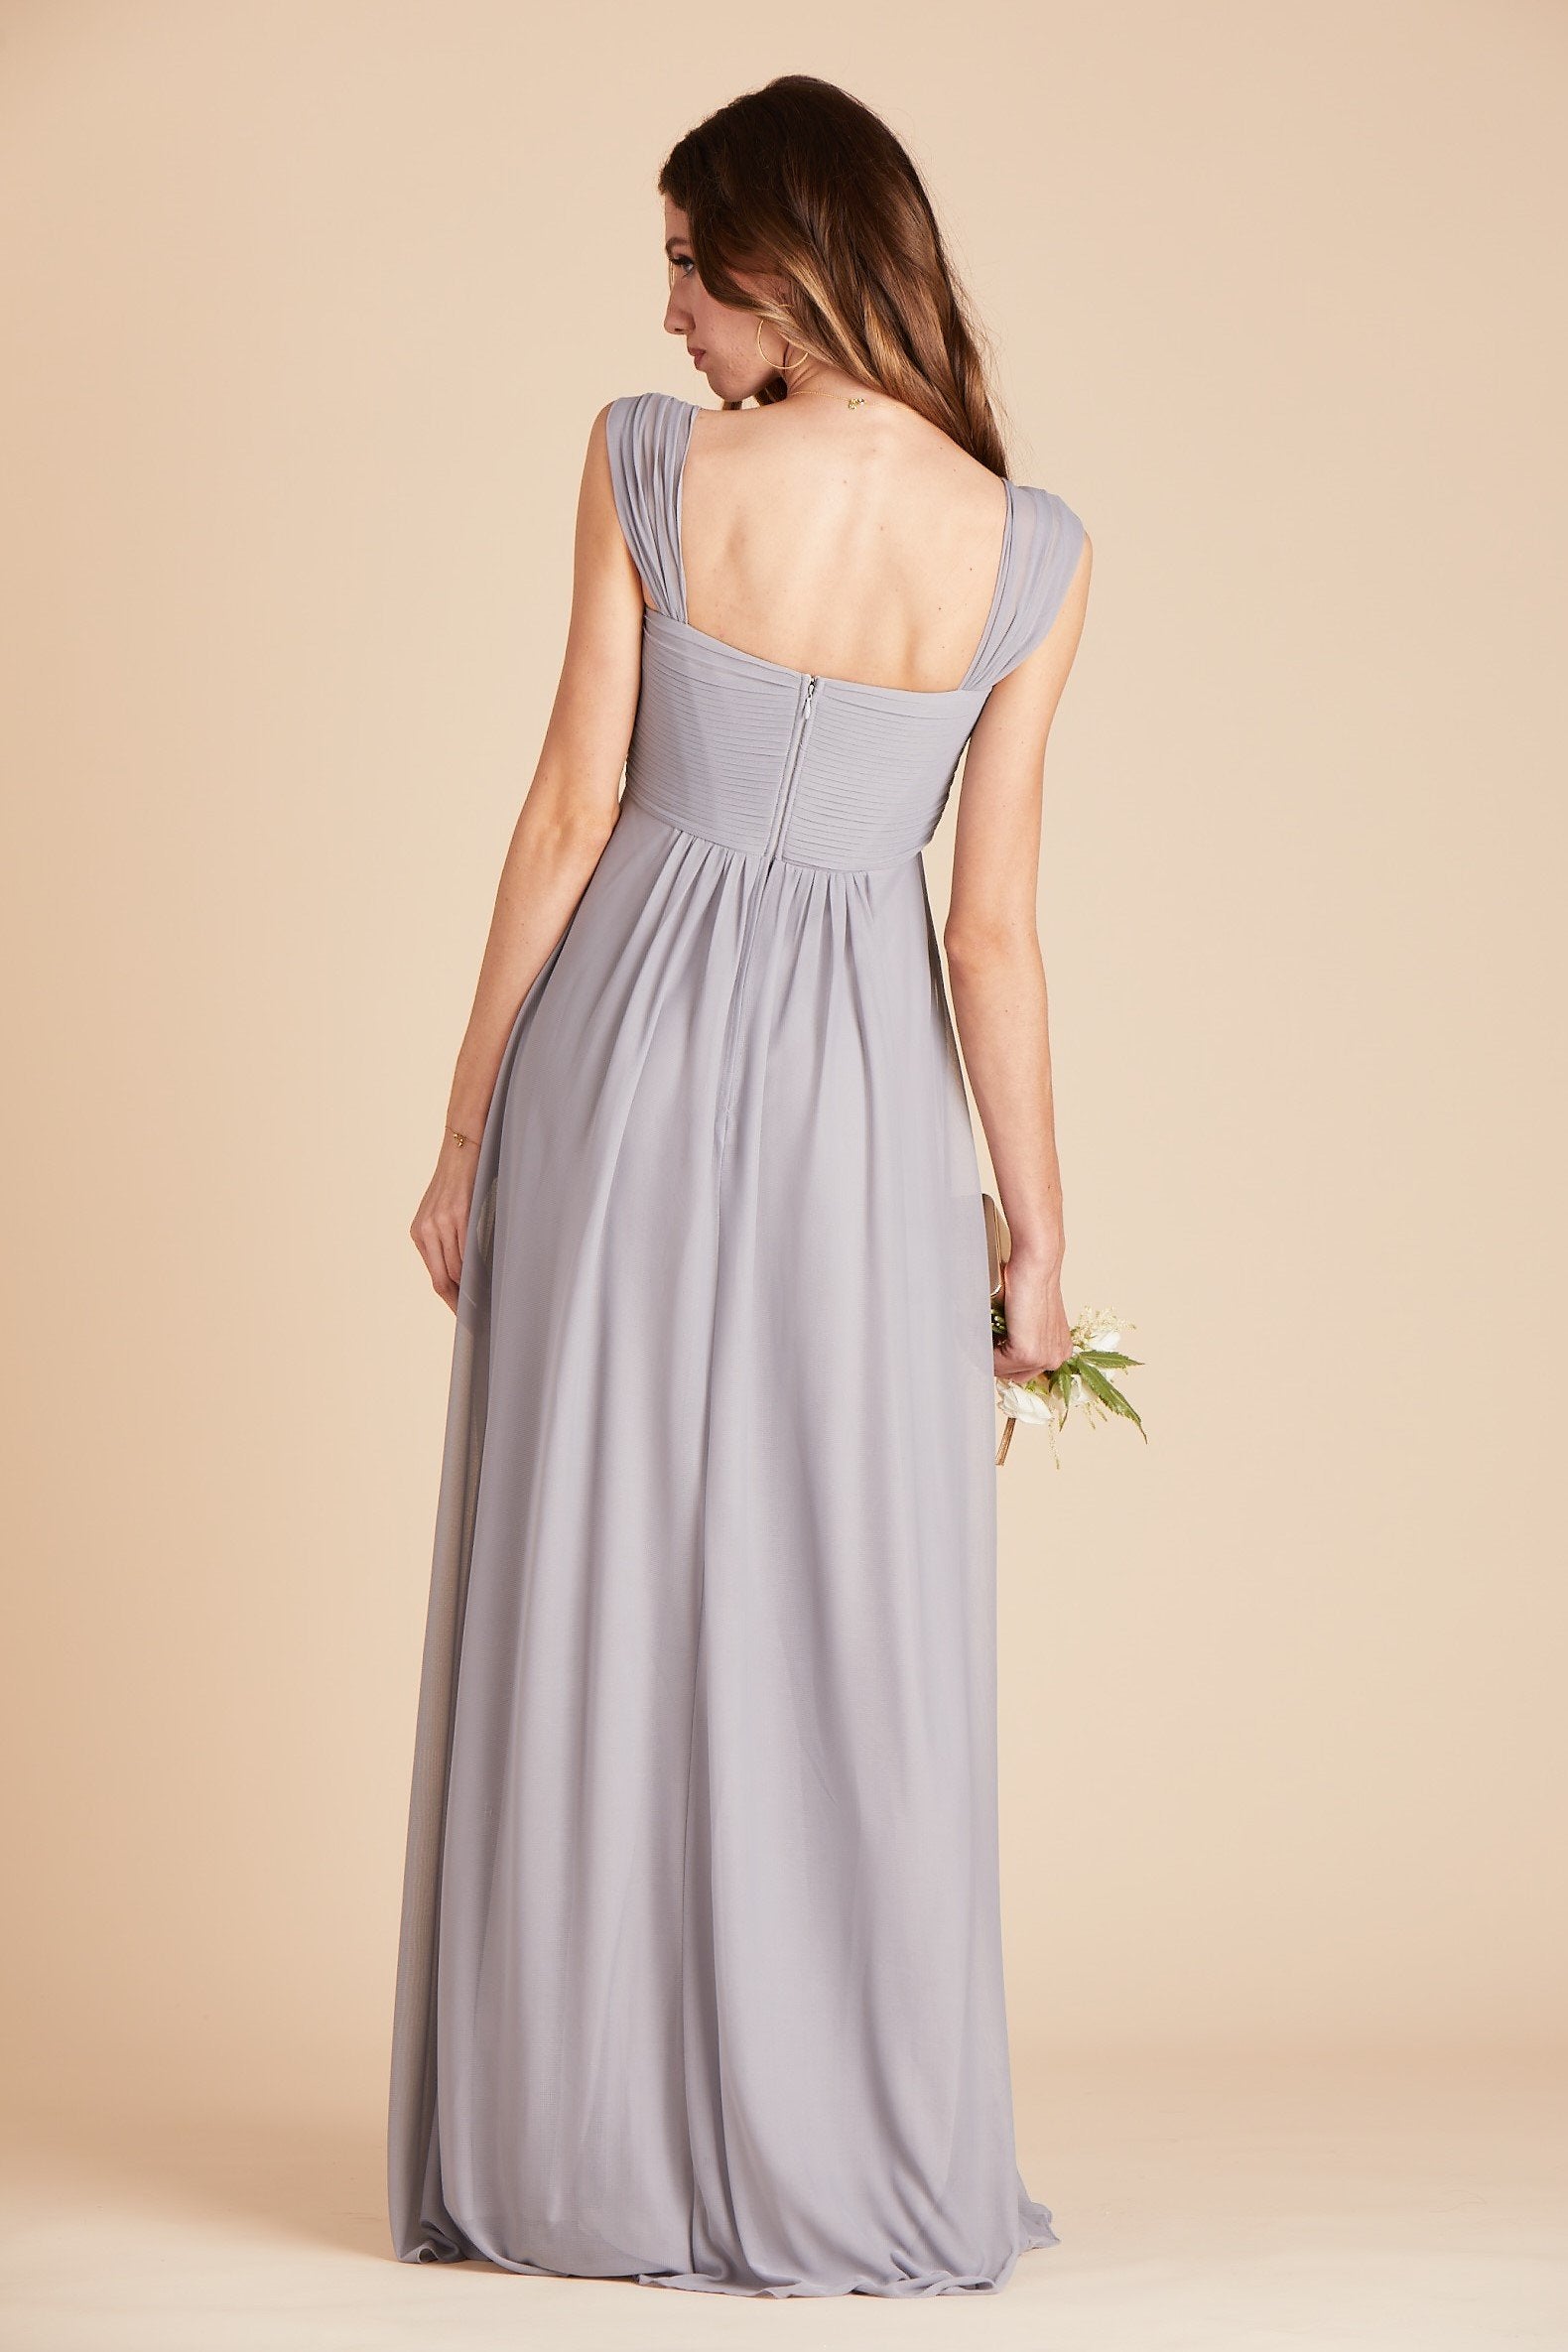 Maria convertible bridesmaids dress in silver mesh by Birdy Grey, back view